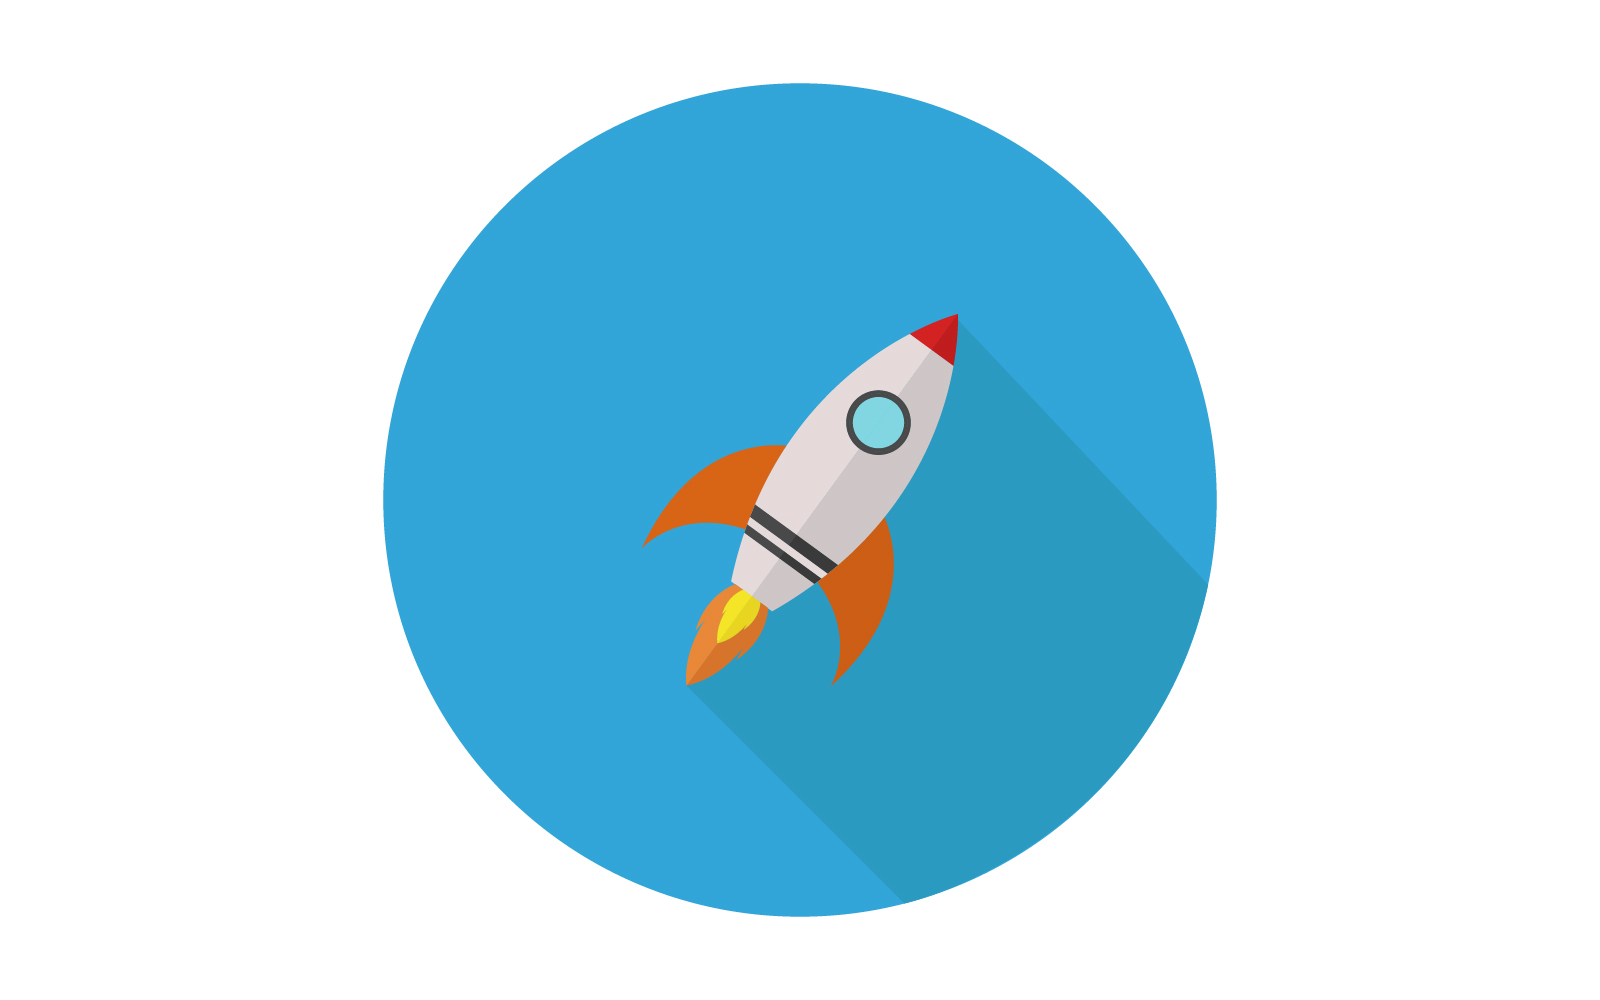 Rocket illustrated on a white background in vector and colored